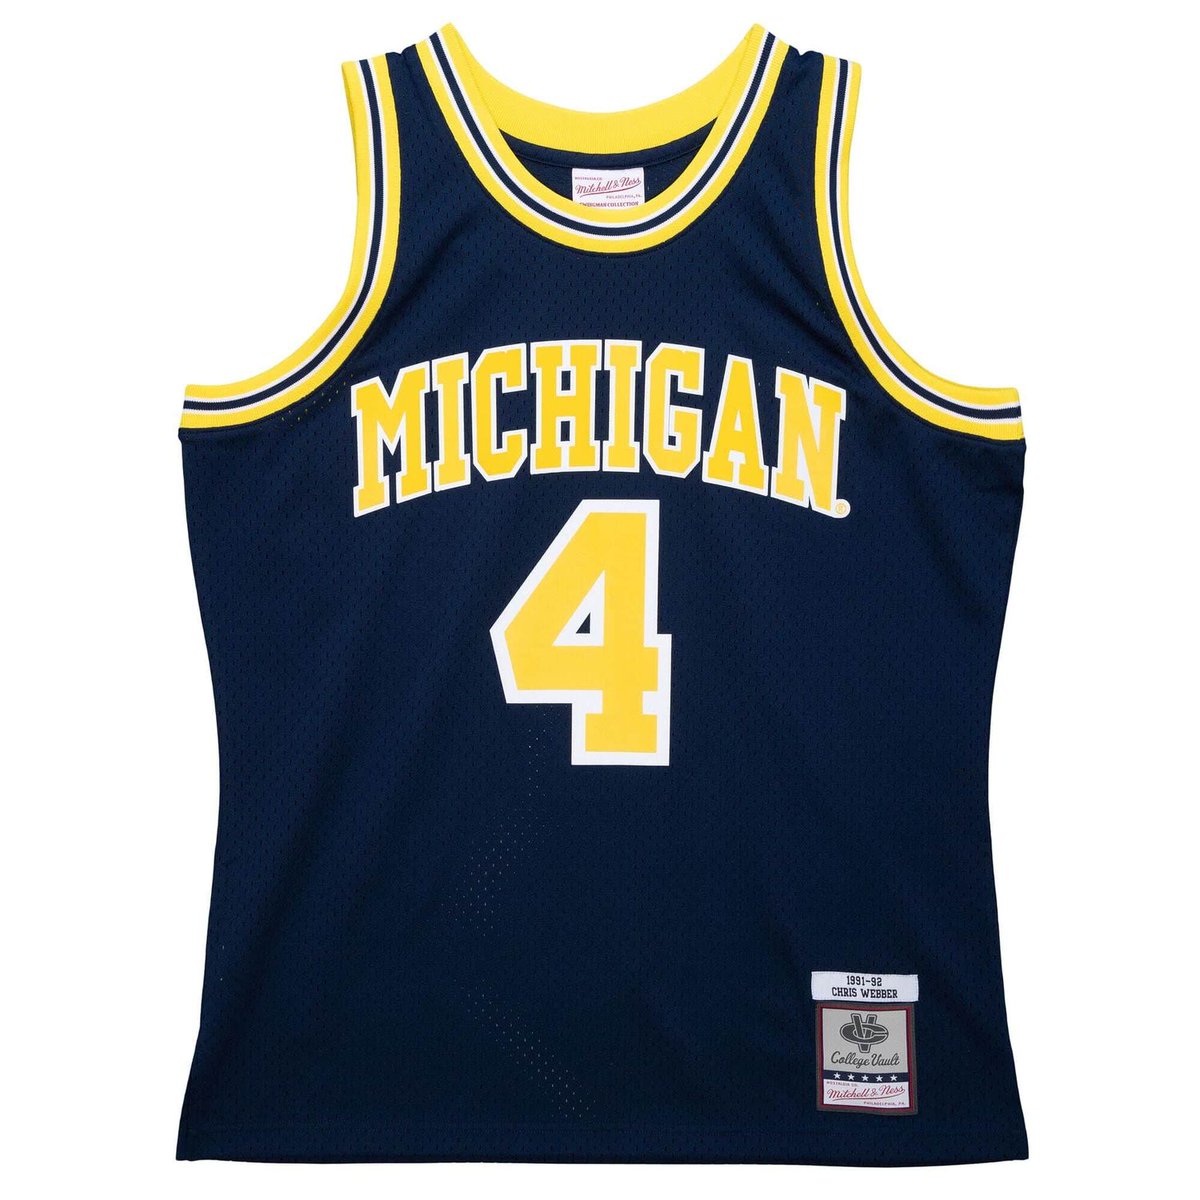 65% OFF the Mitchell & Ness Michigan Chris Webber Authentic Jersey 

SHOP HERE: bit.ly/3wPRrBl